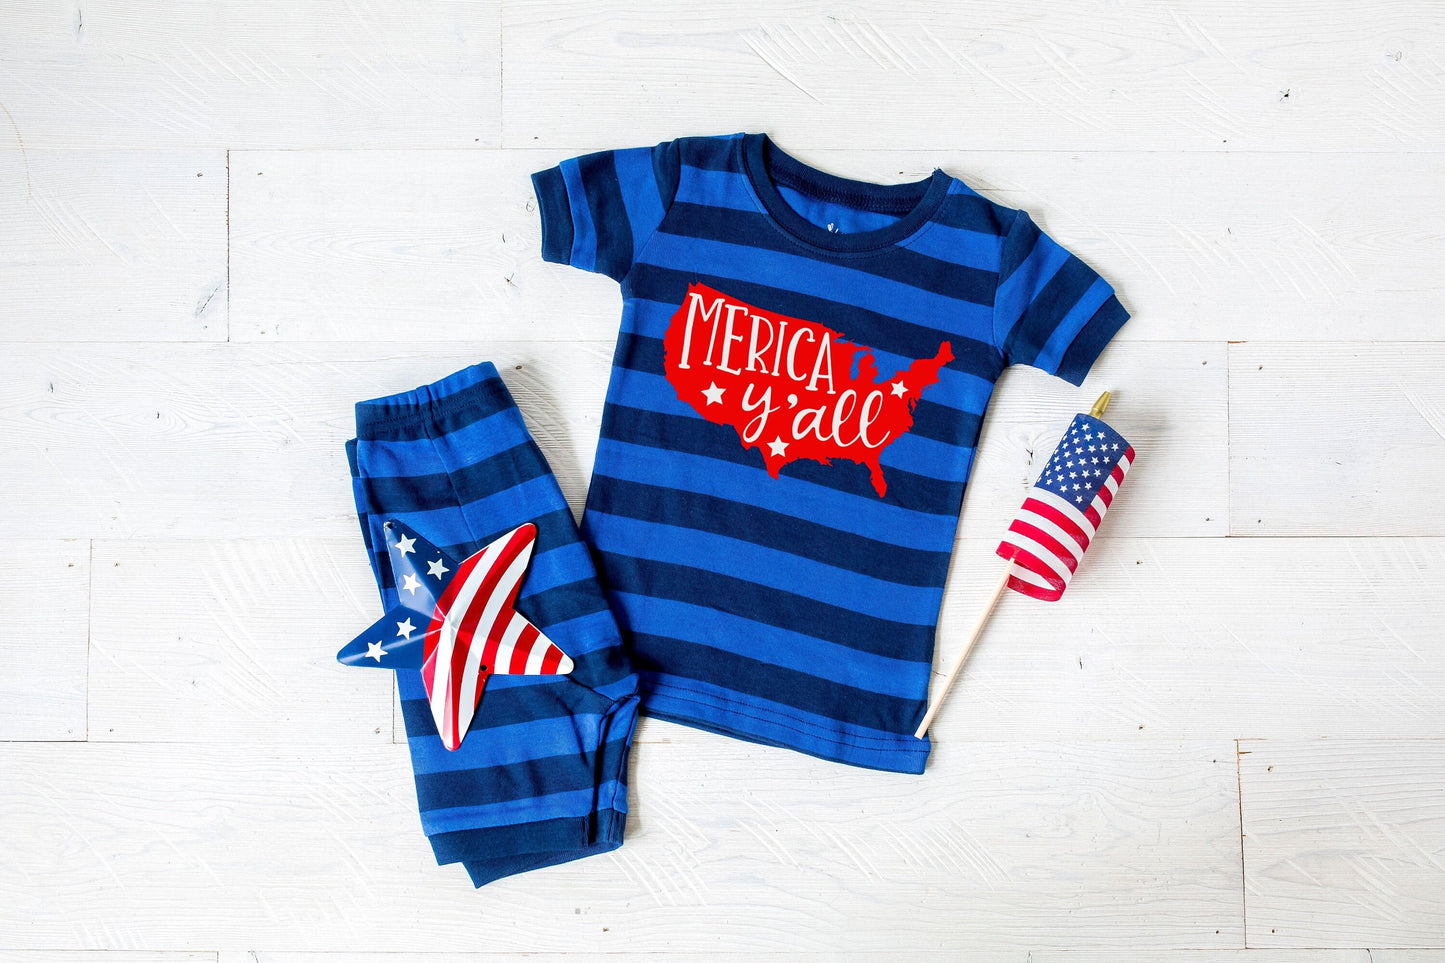 Merica Yall Blue Striped Shorts Toddler and Youth Pajamas - Kids 4th of July Pajamas - Sleepover Pajamas - Summer Pajamas - Fourth of July